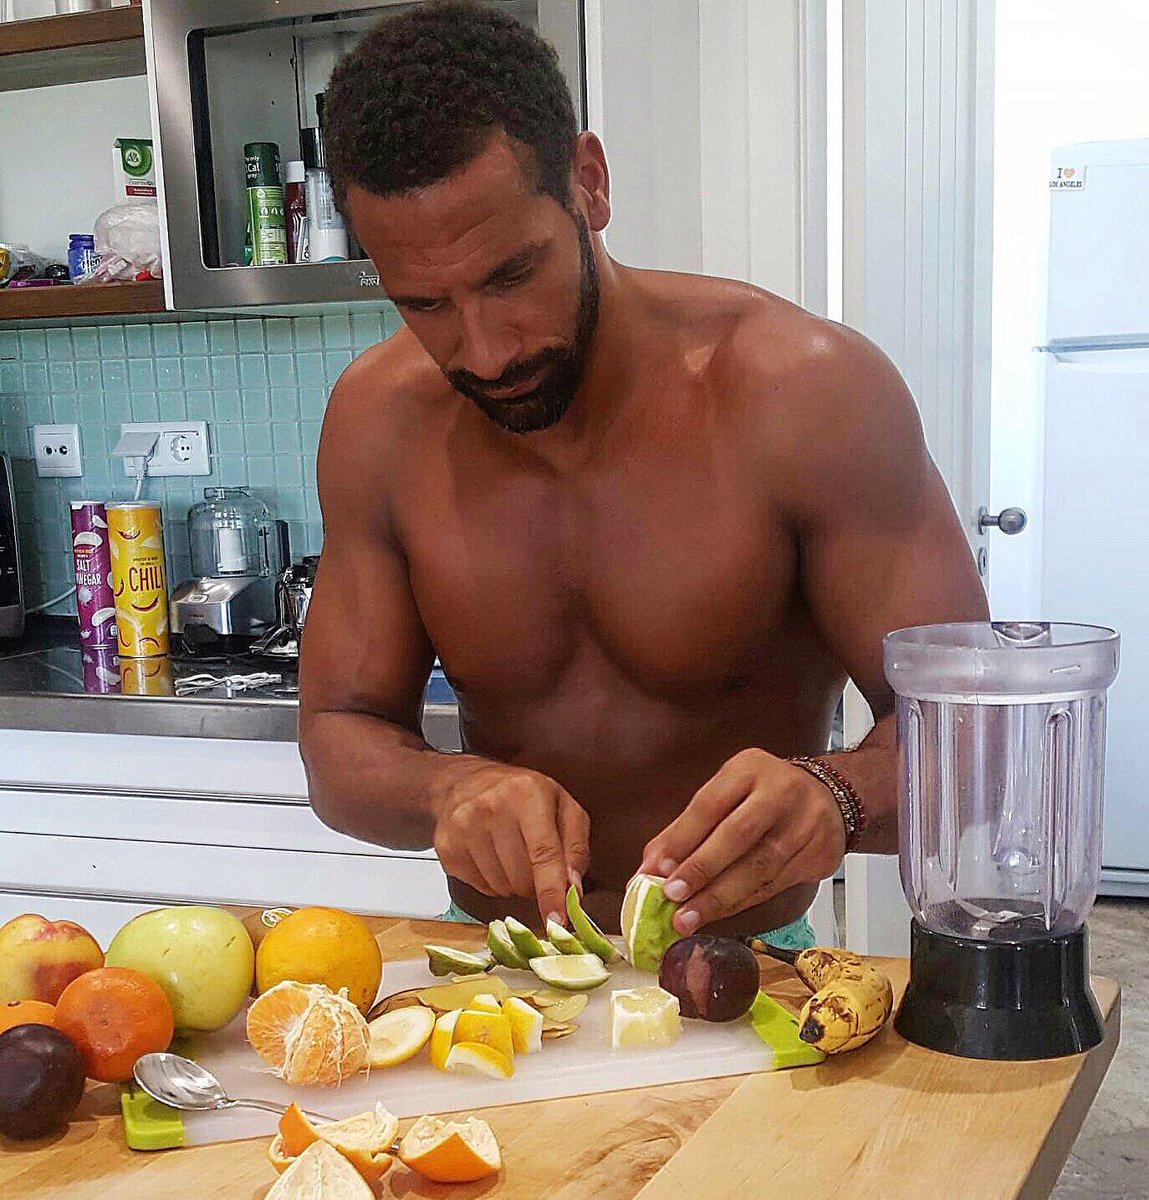 Rio Ferdinand on X: "Just finished workout... salmon/sardines & eggs breakfast then fruit smoothie for me & the kids round the pool! 😎 https://t.co/UTtS7PTGxG" / X